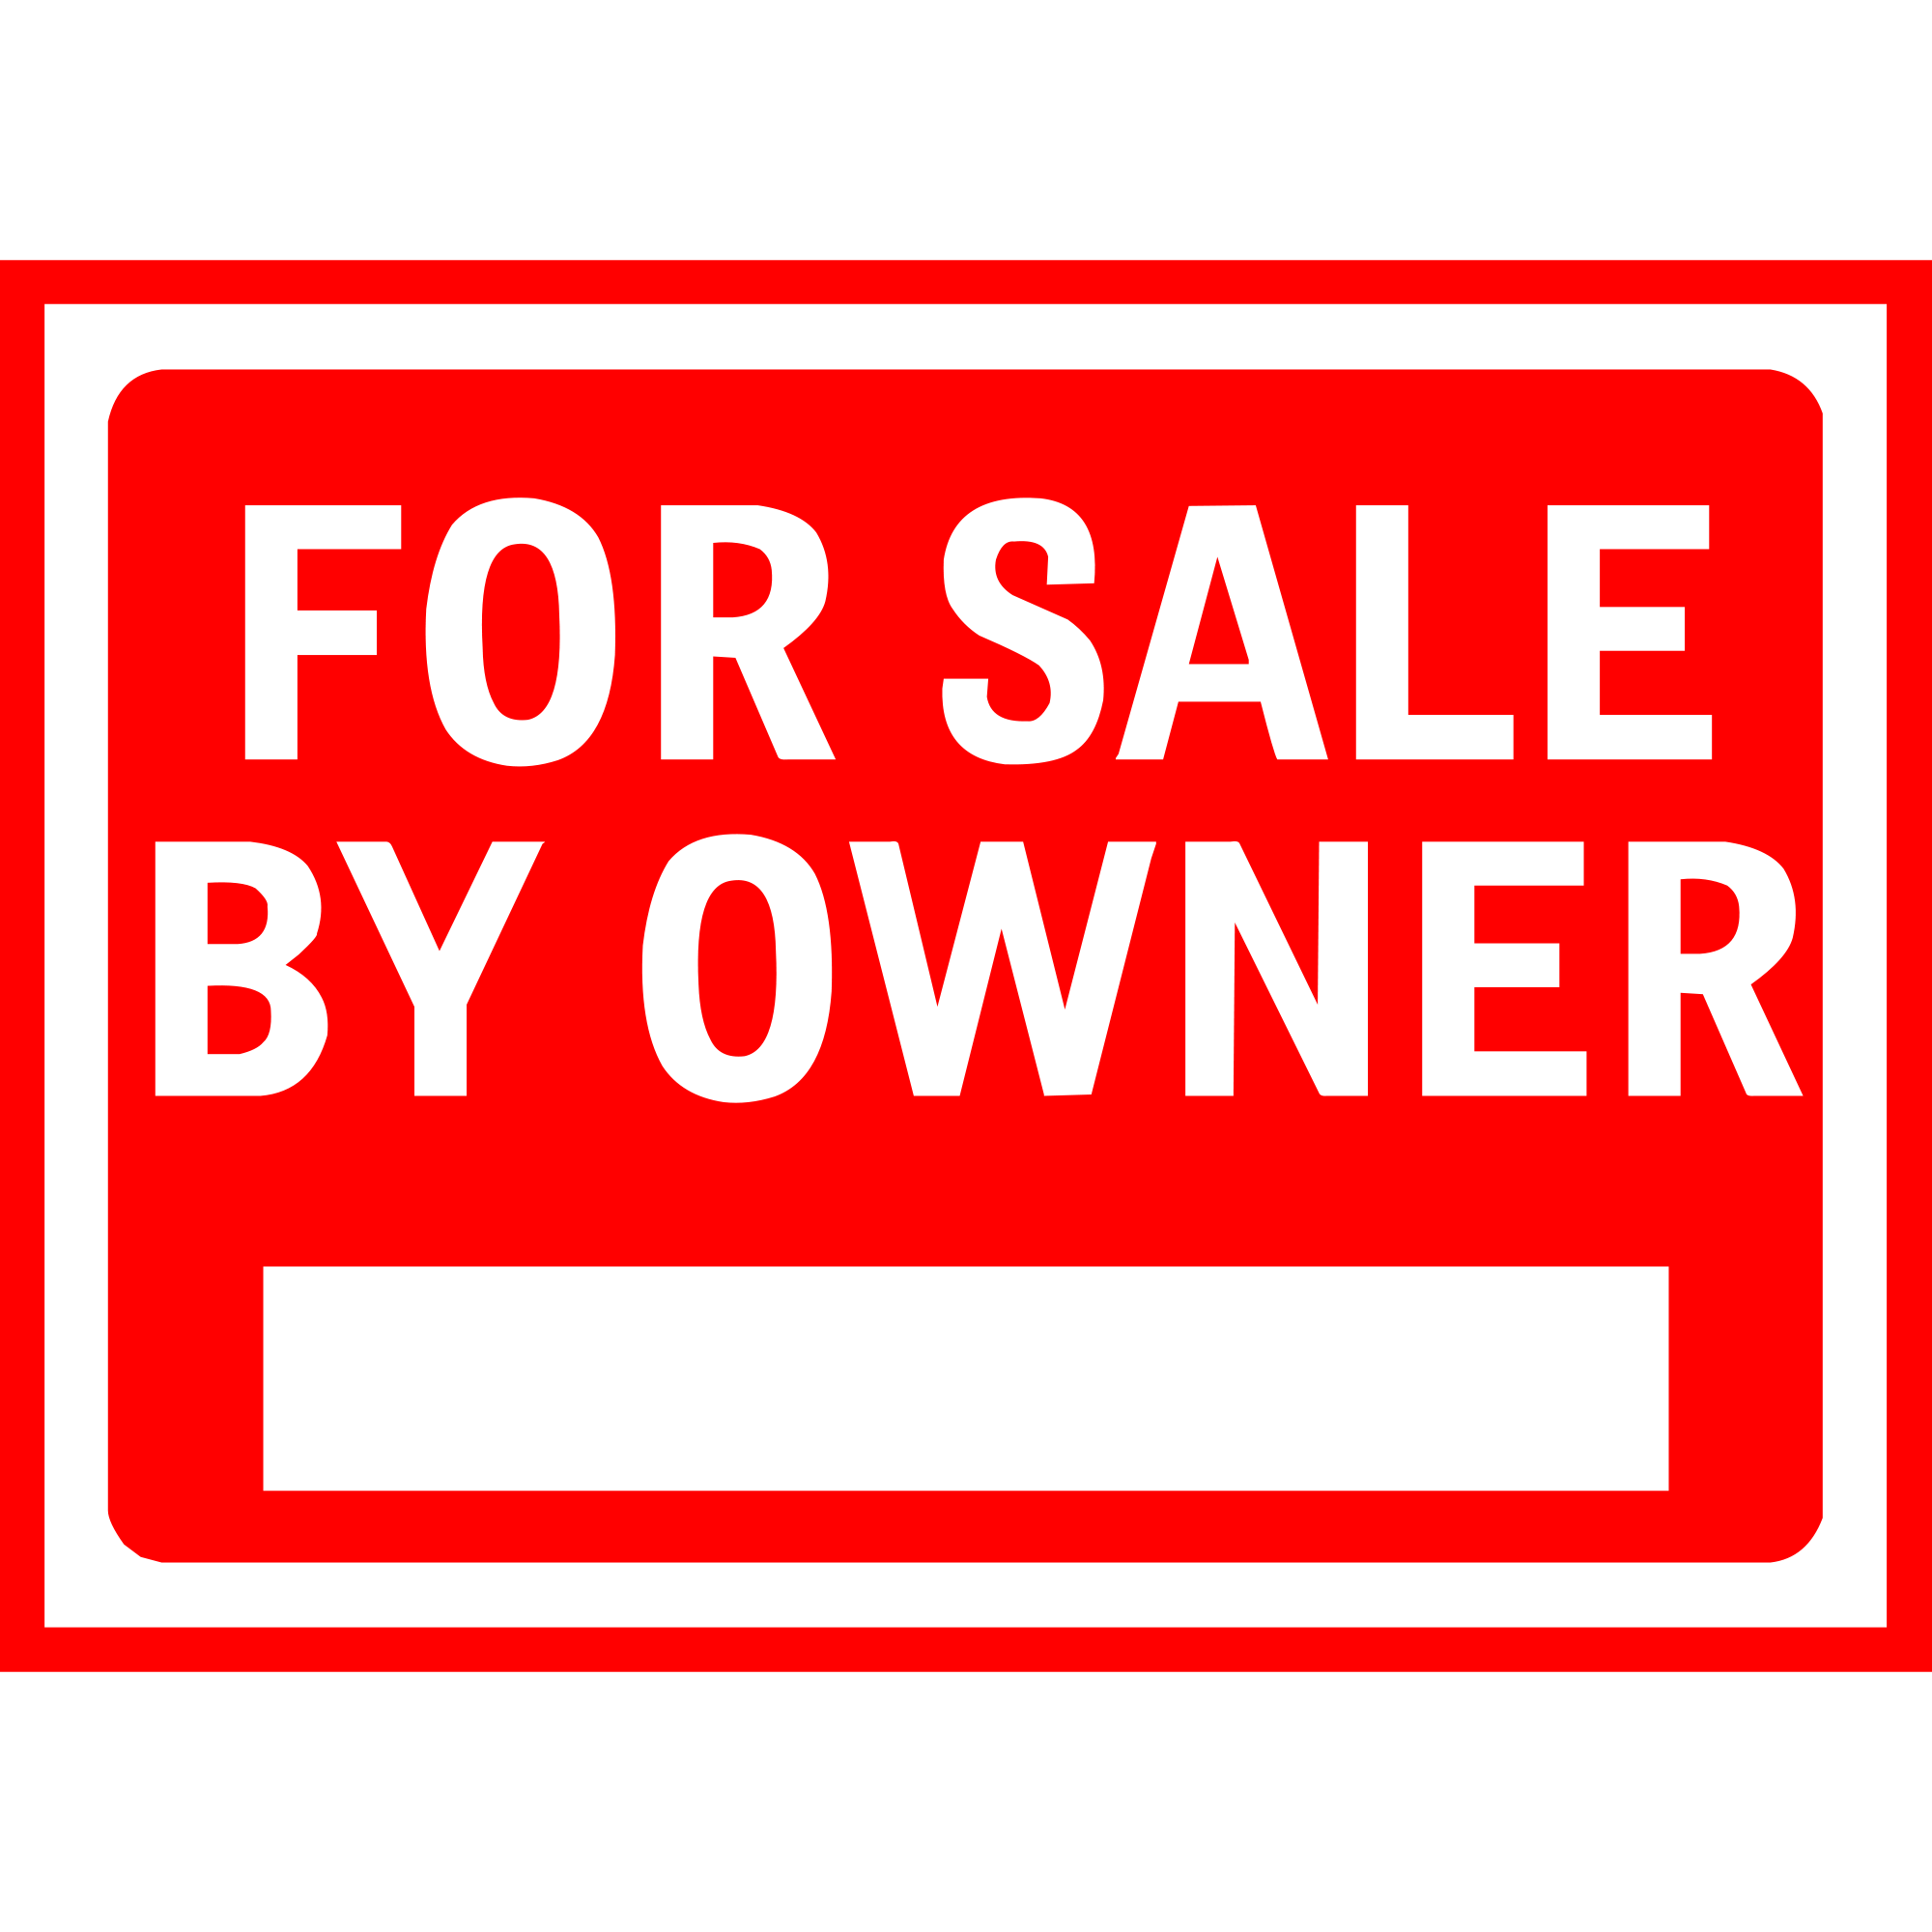 For sale by owner - Wikipedia, the free encyclopedia